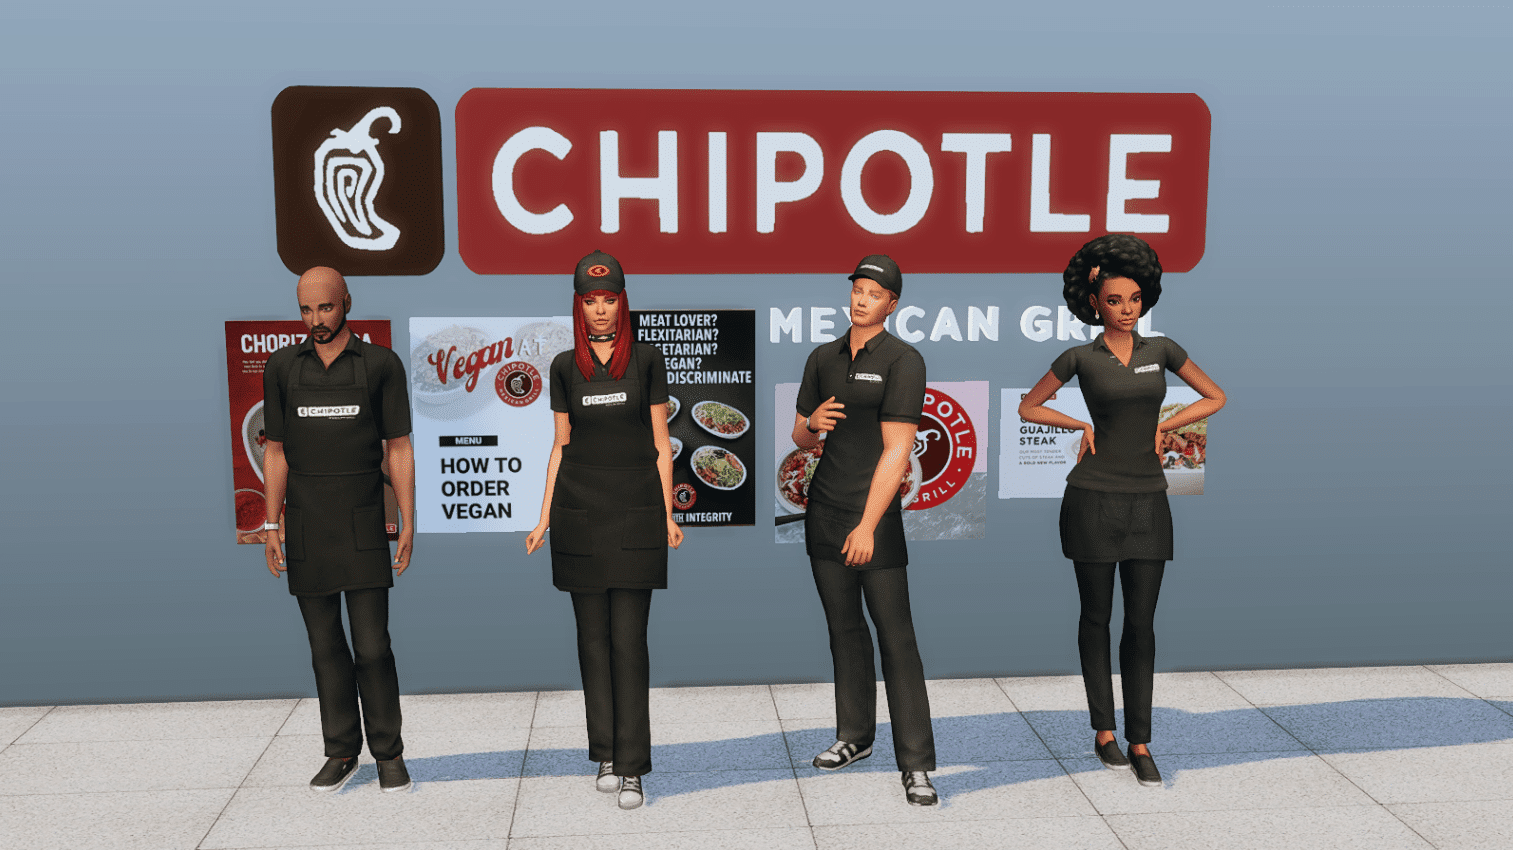 Chipotle Uniform & Hat for Male and Female [MM]